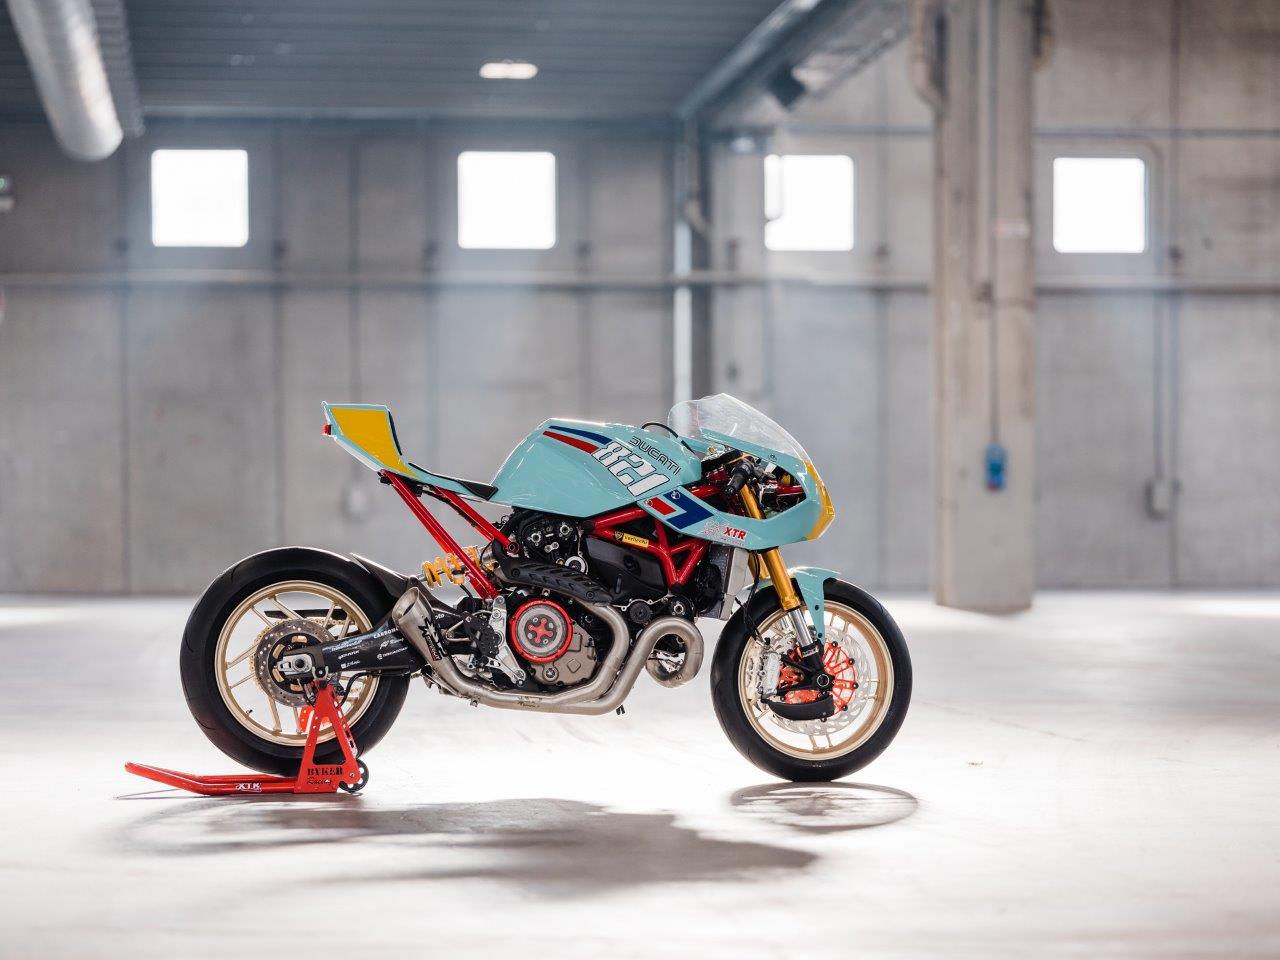 Ducati Race motorcycle from Spain's XTR Pepo